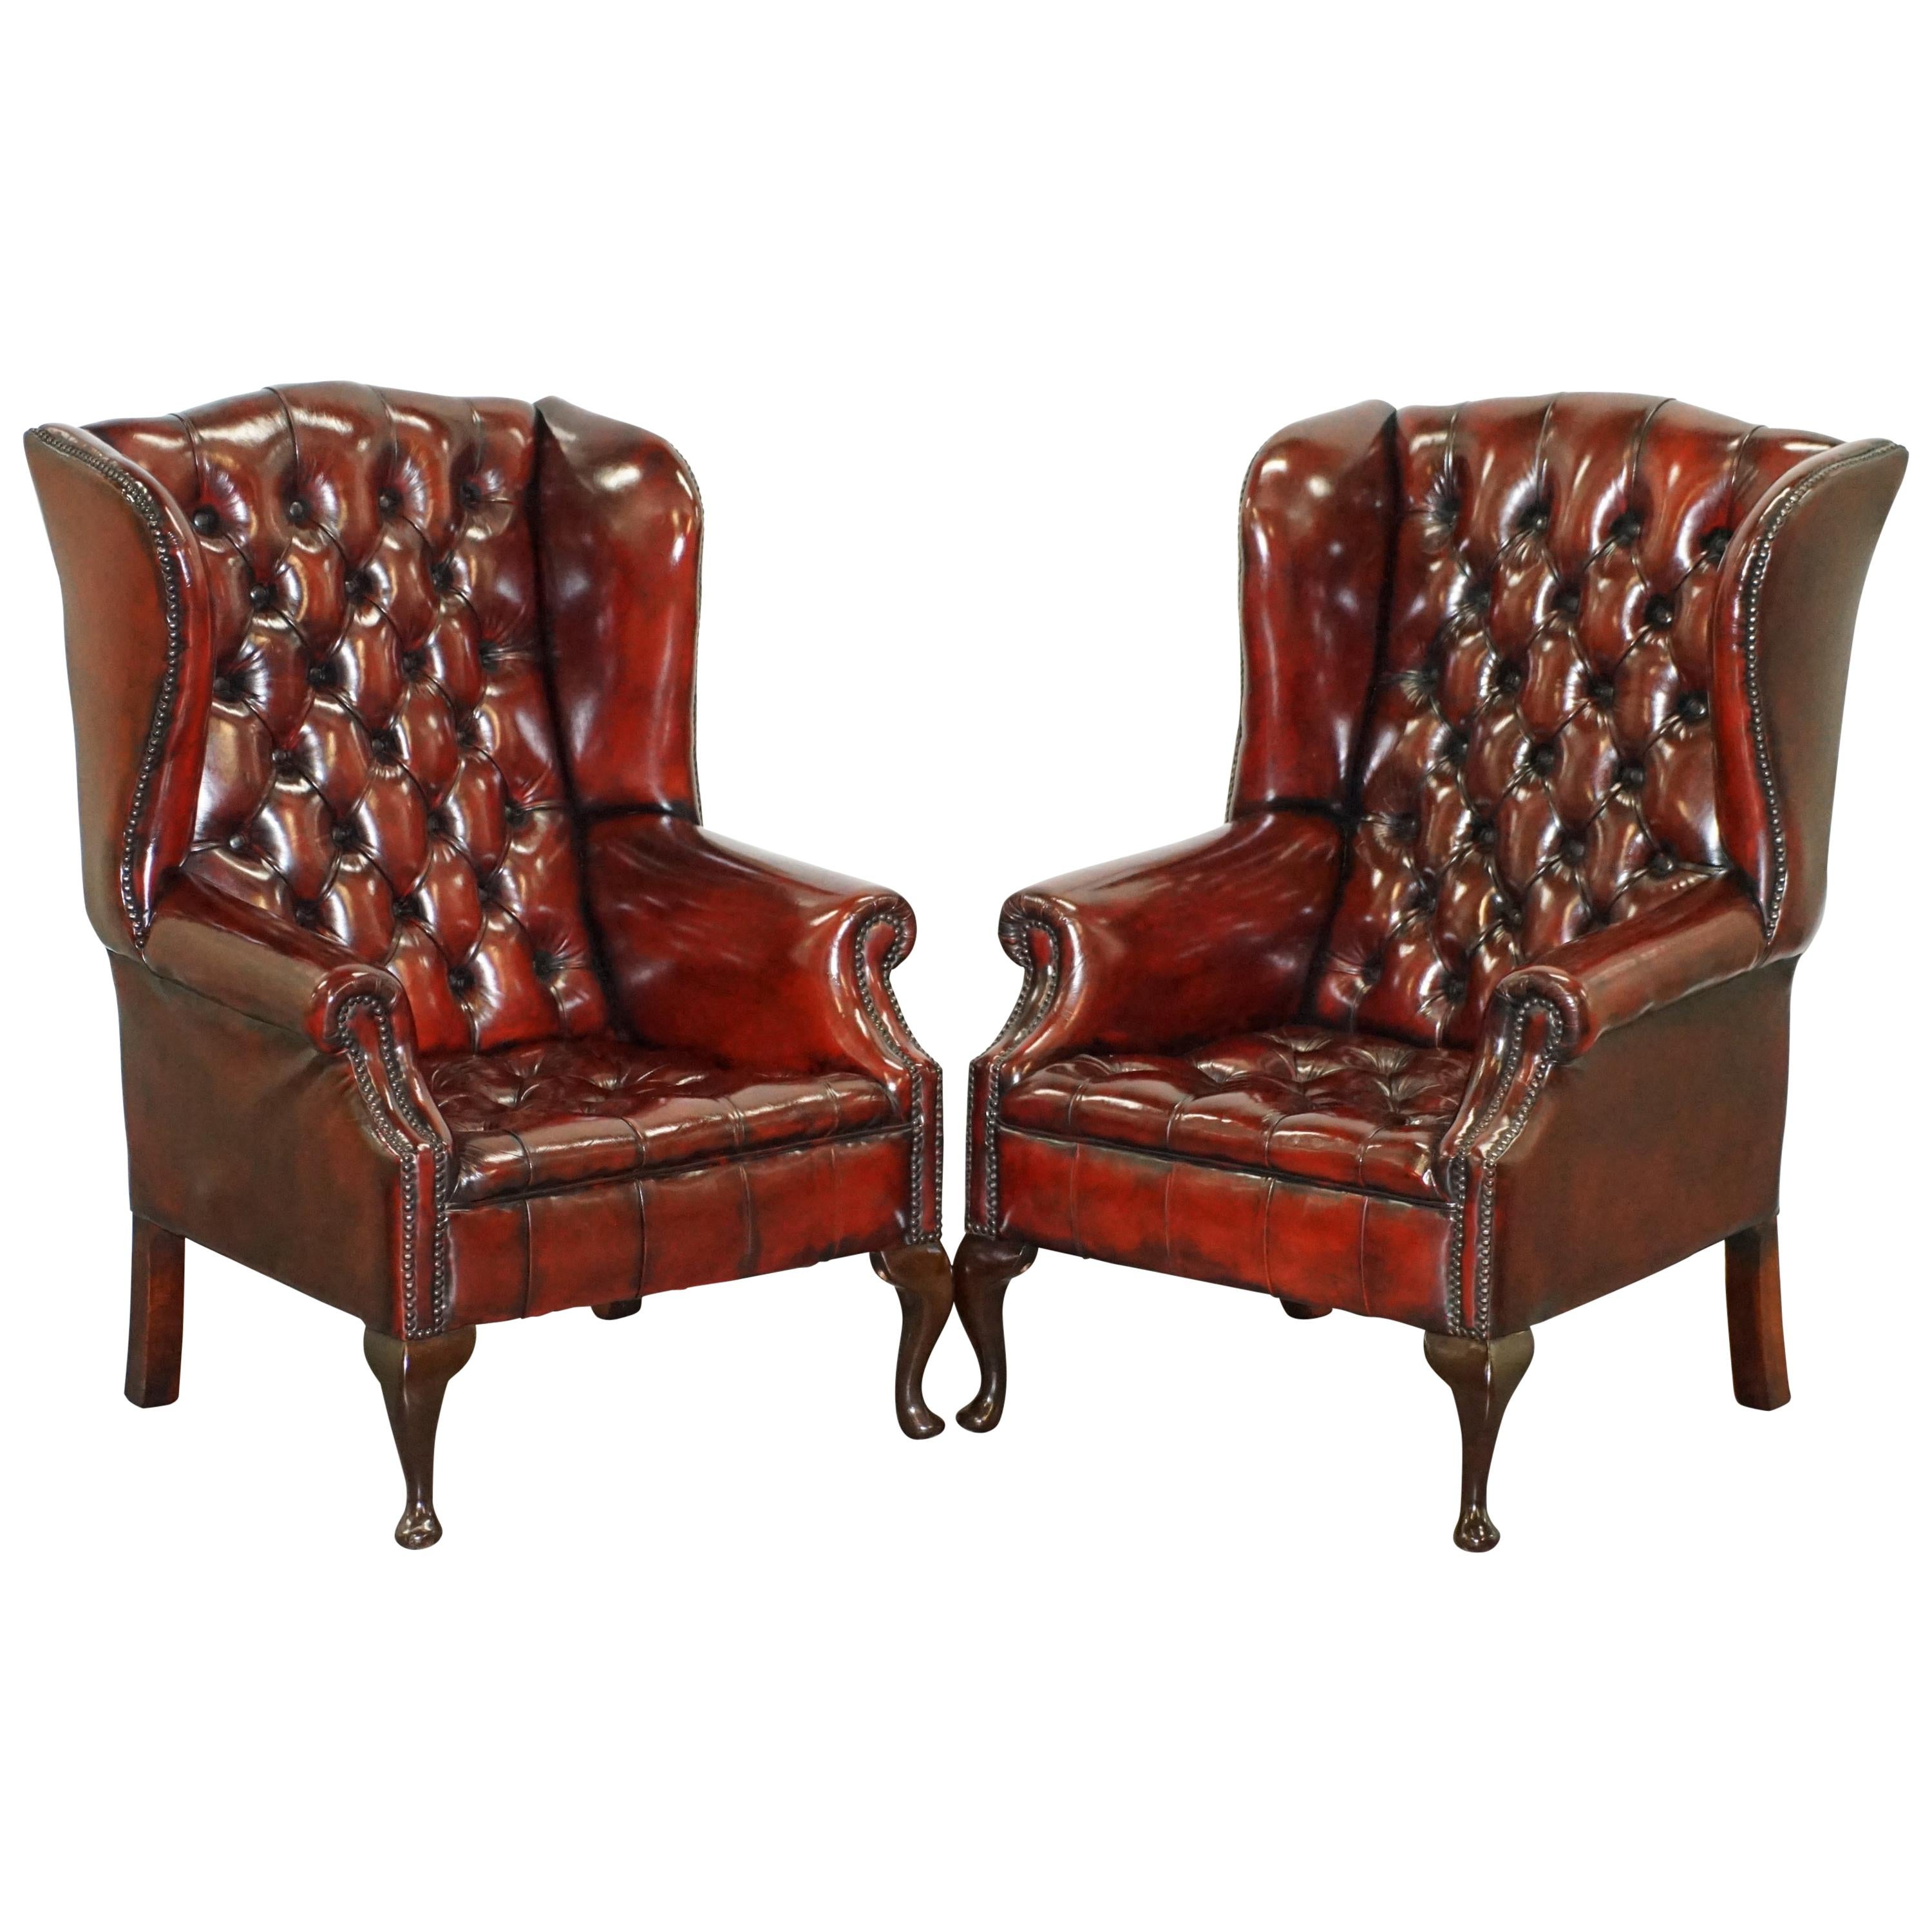 Pair of Restored Oxblood Leather Fully Tufted Chesterfield Wingback Armchairs